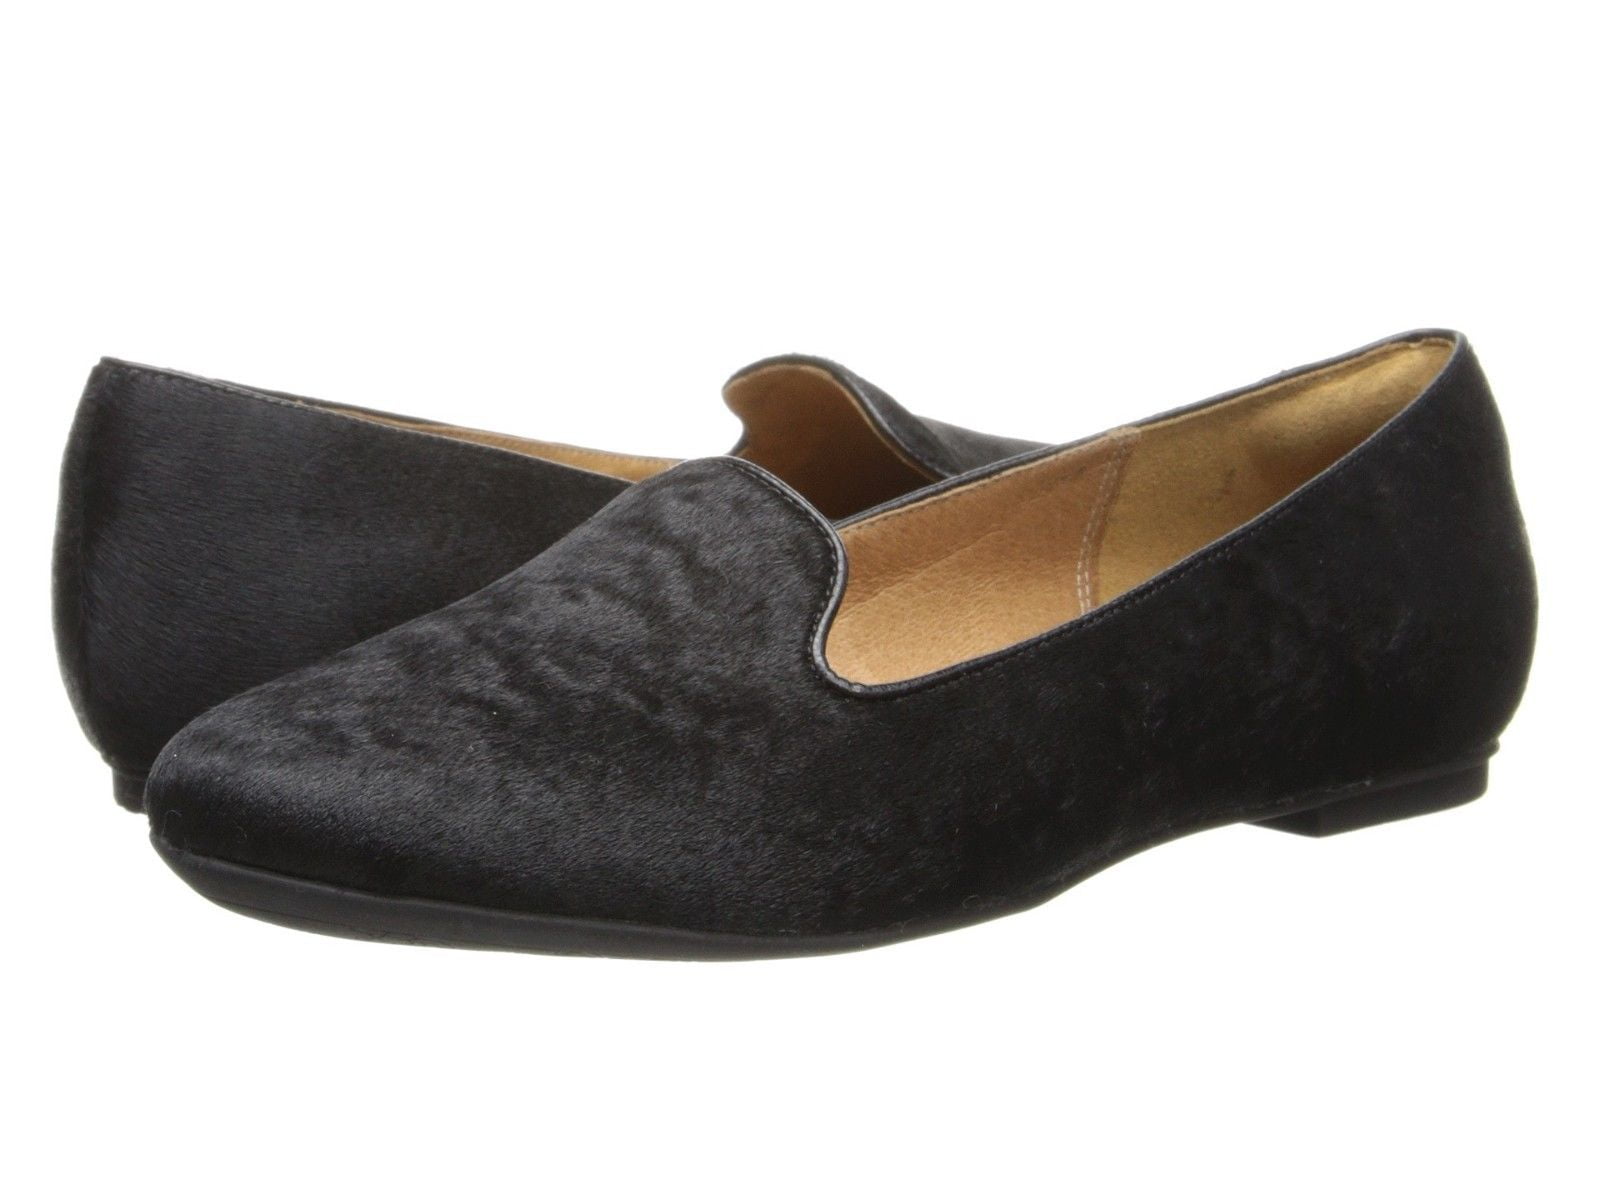 Clarks Women's Shoes Indigo Valley Lounge Loafers Pony Hair 